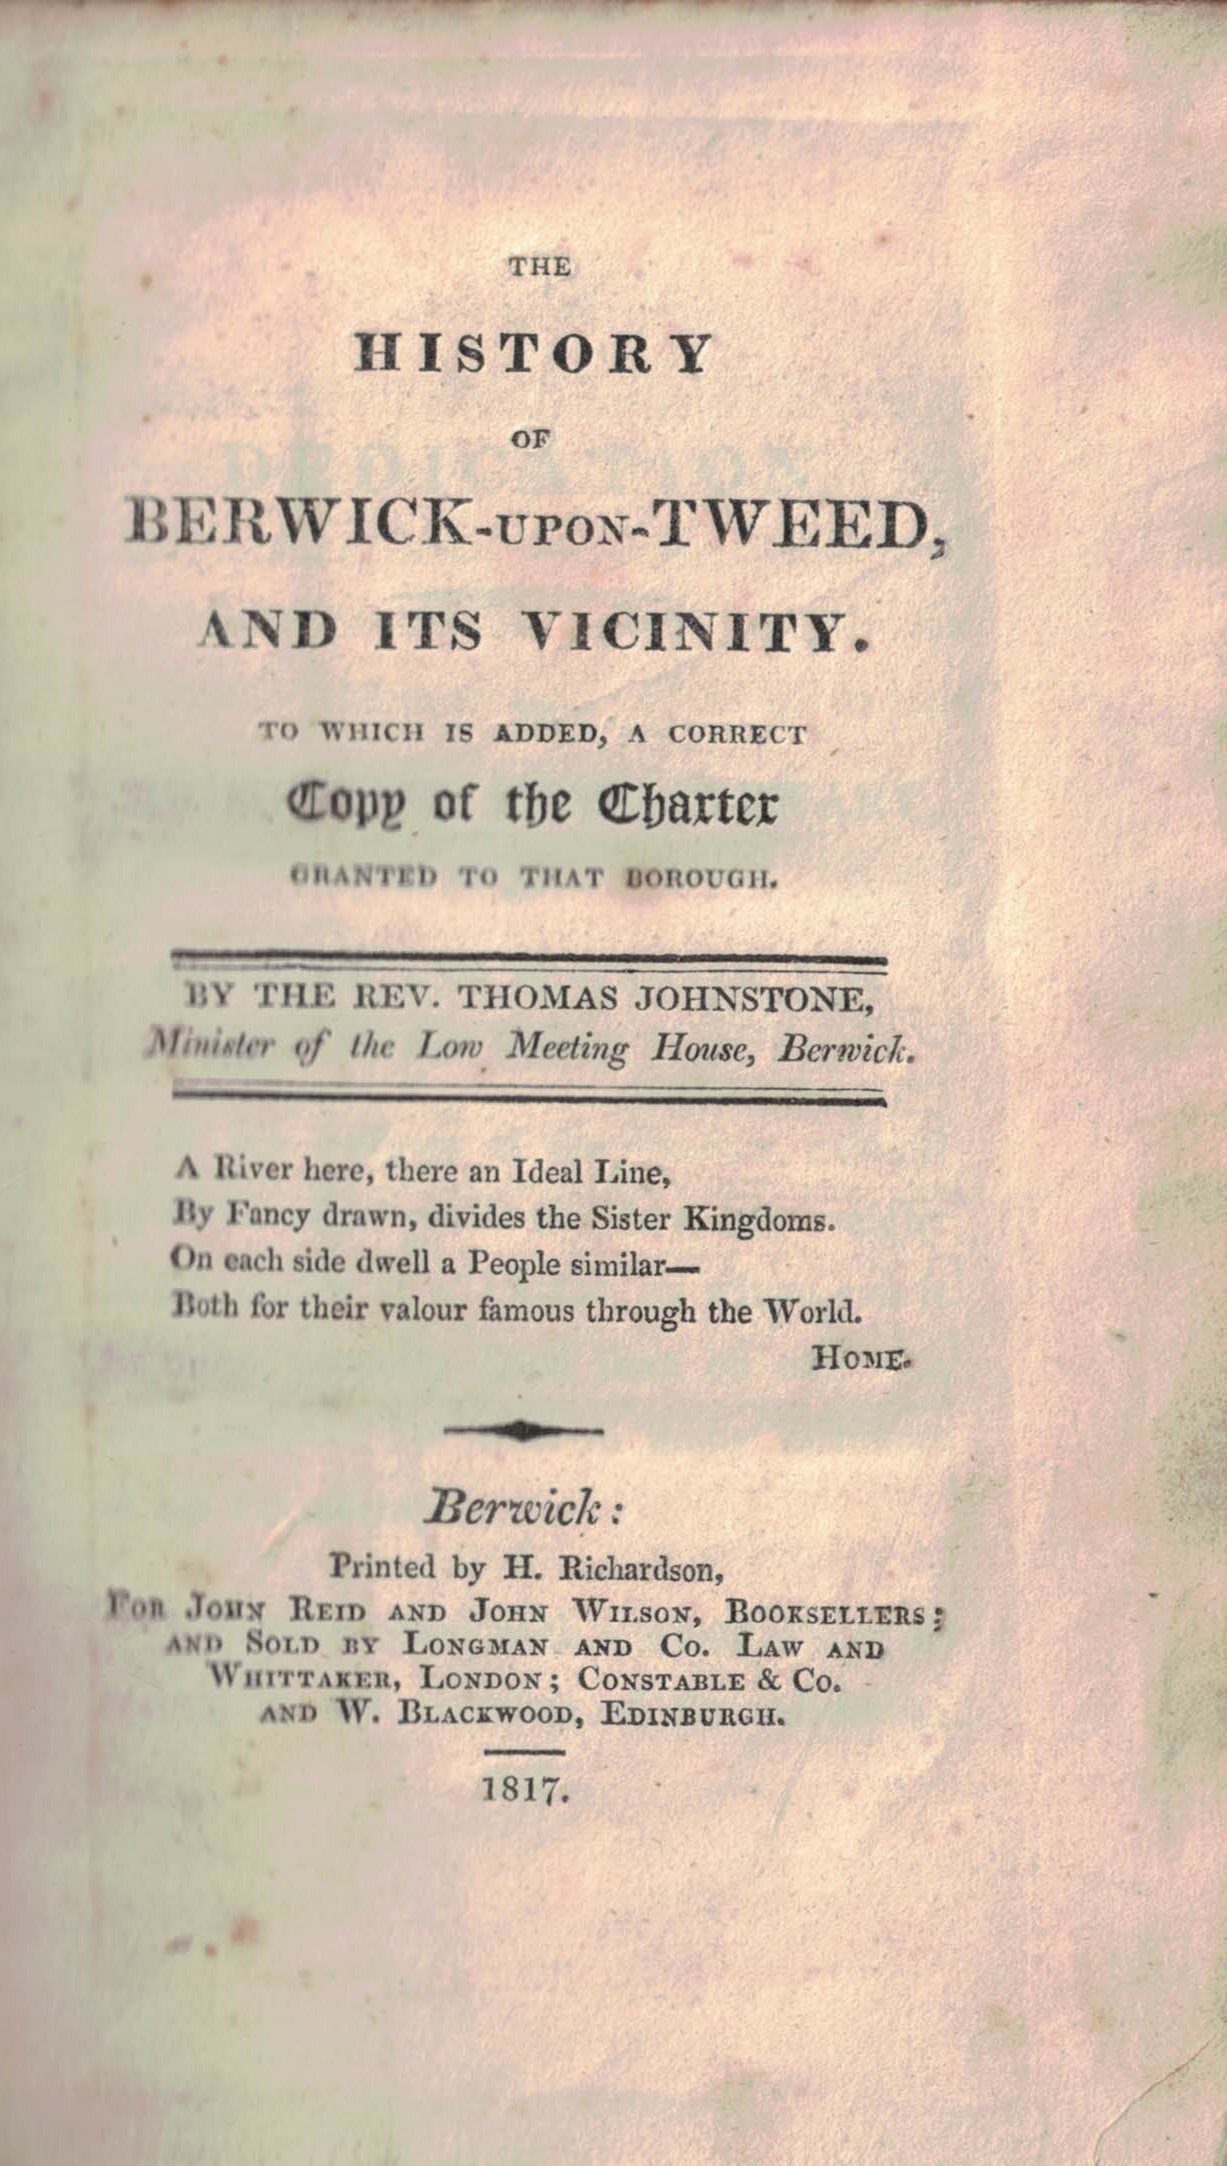 The History of Berwick-upon-Tweed, and its Vicinity. To Which is Added, a Correct Copy of the Charter Granted to that Borough.